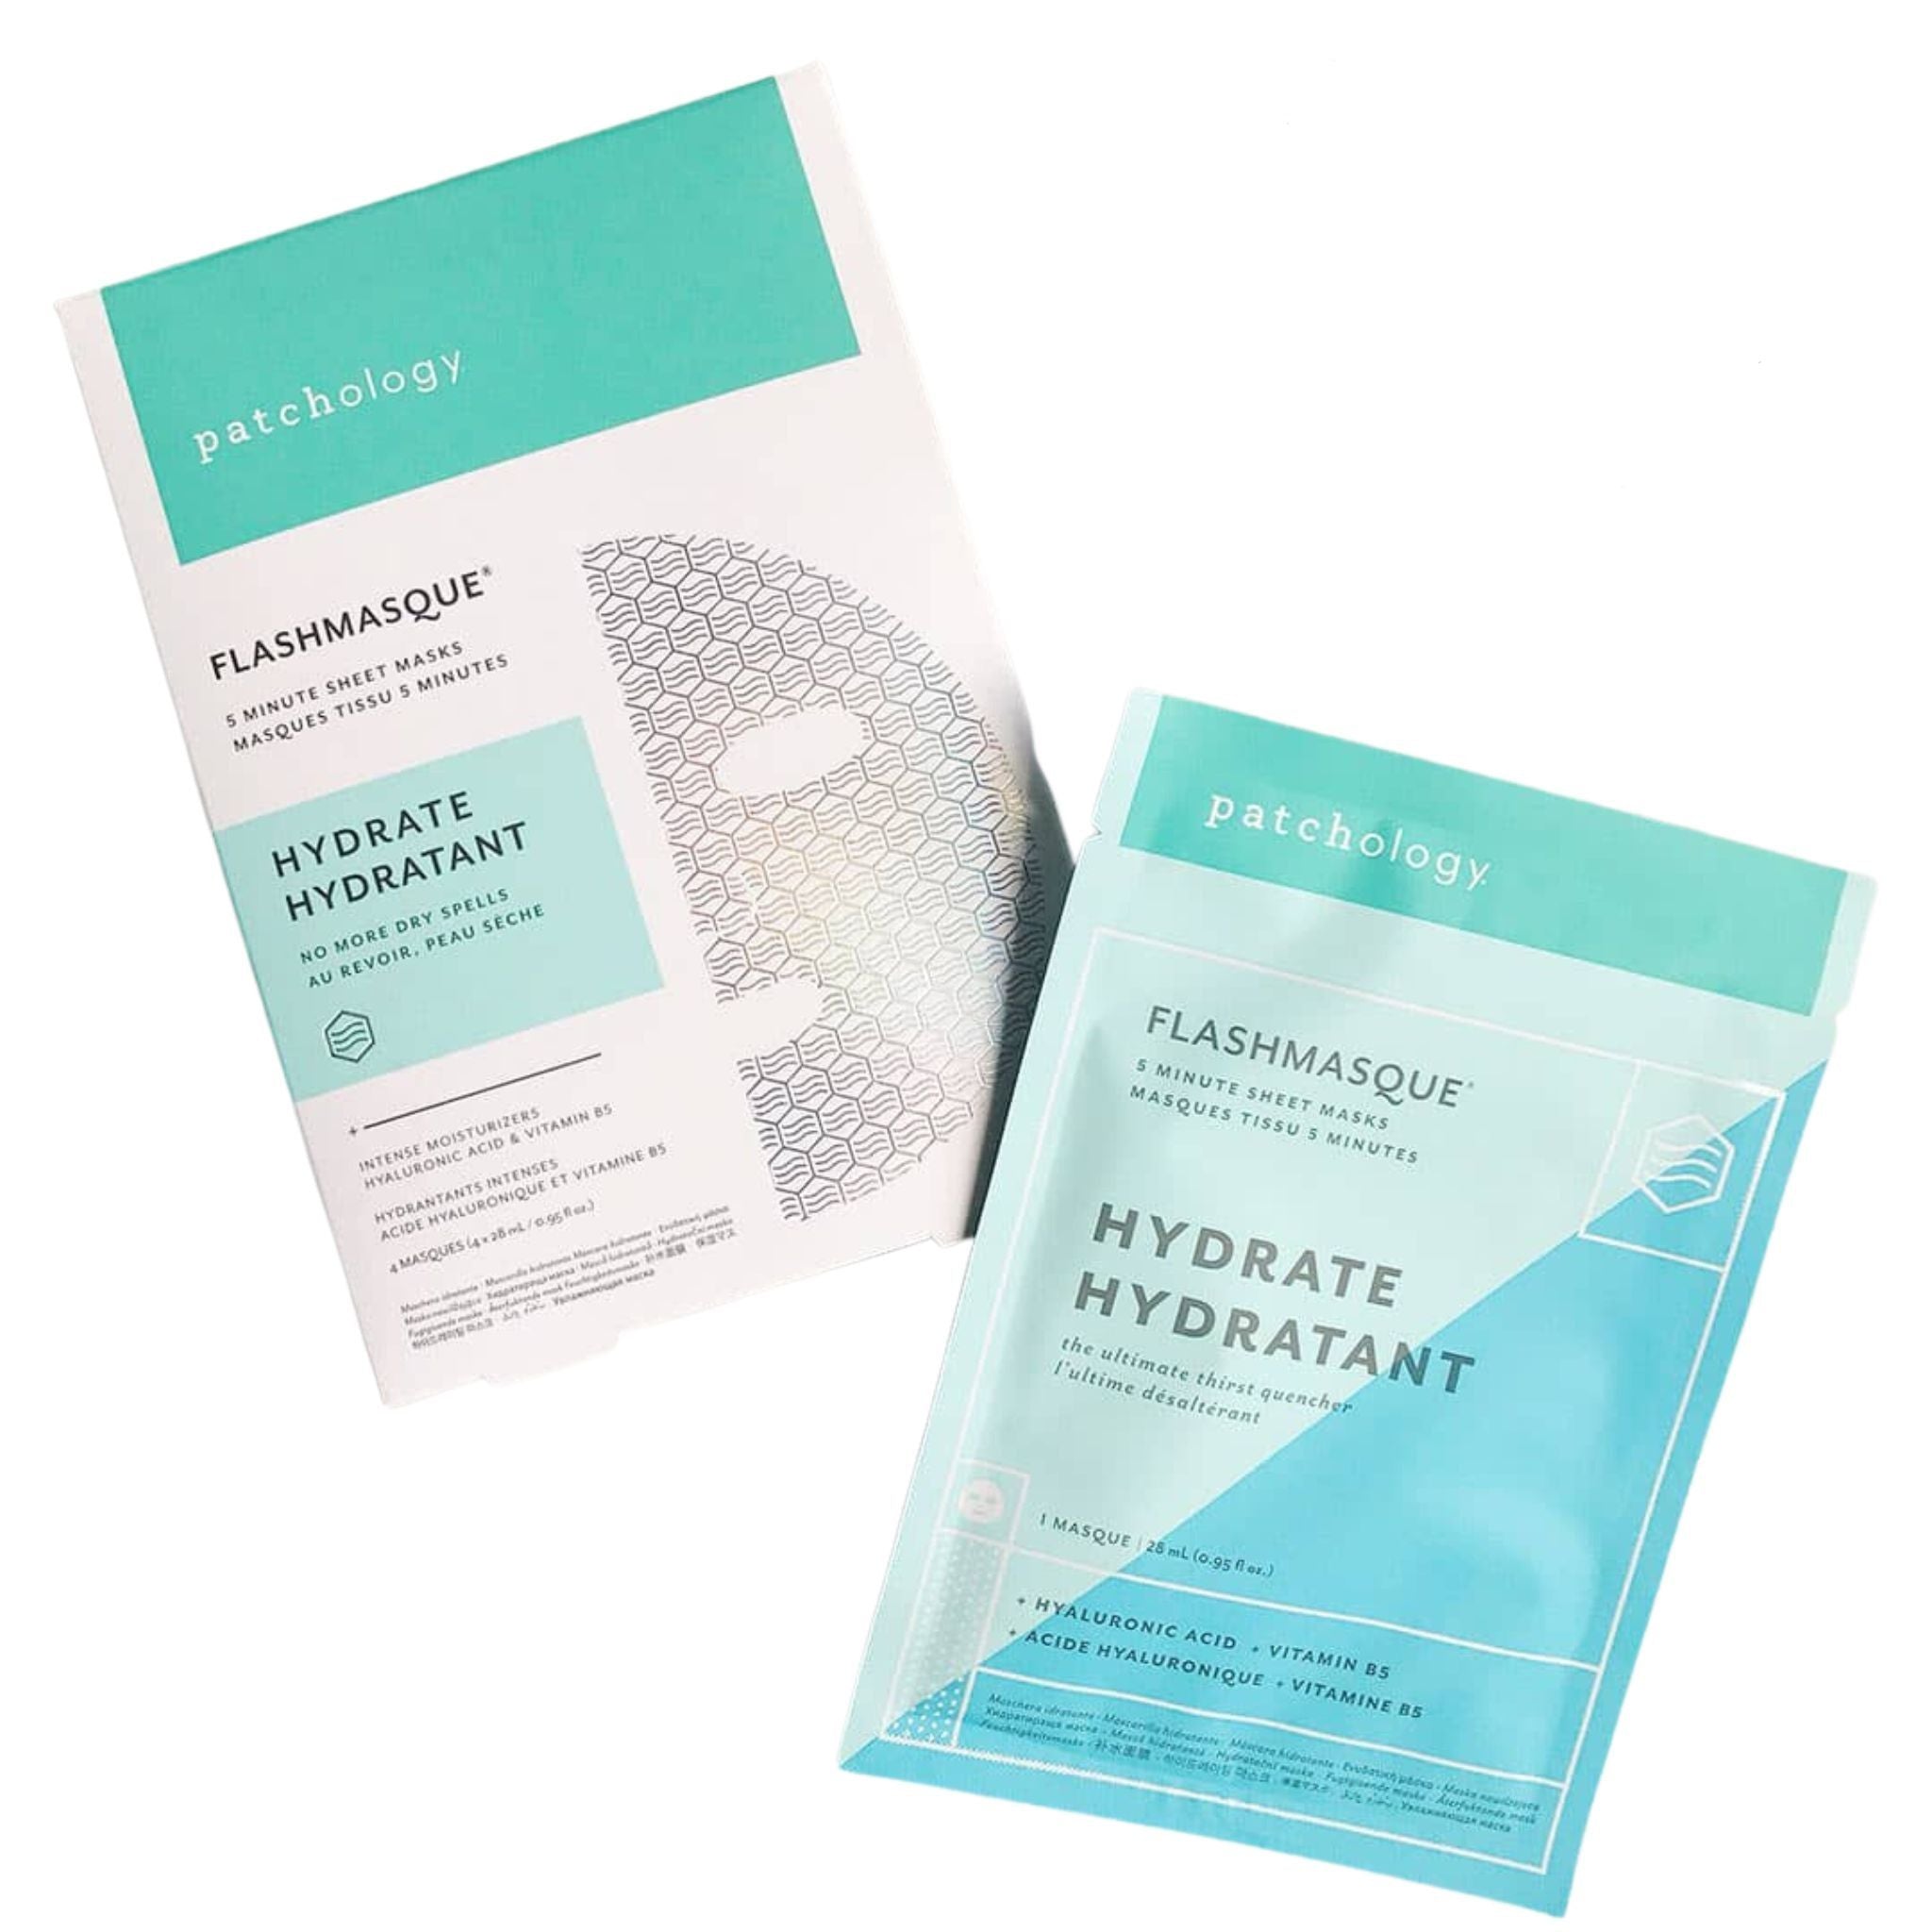 Patchology - FlashMasque® Hydrate 5 Minute Sheet Masks - 4 Pack